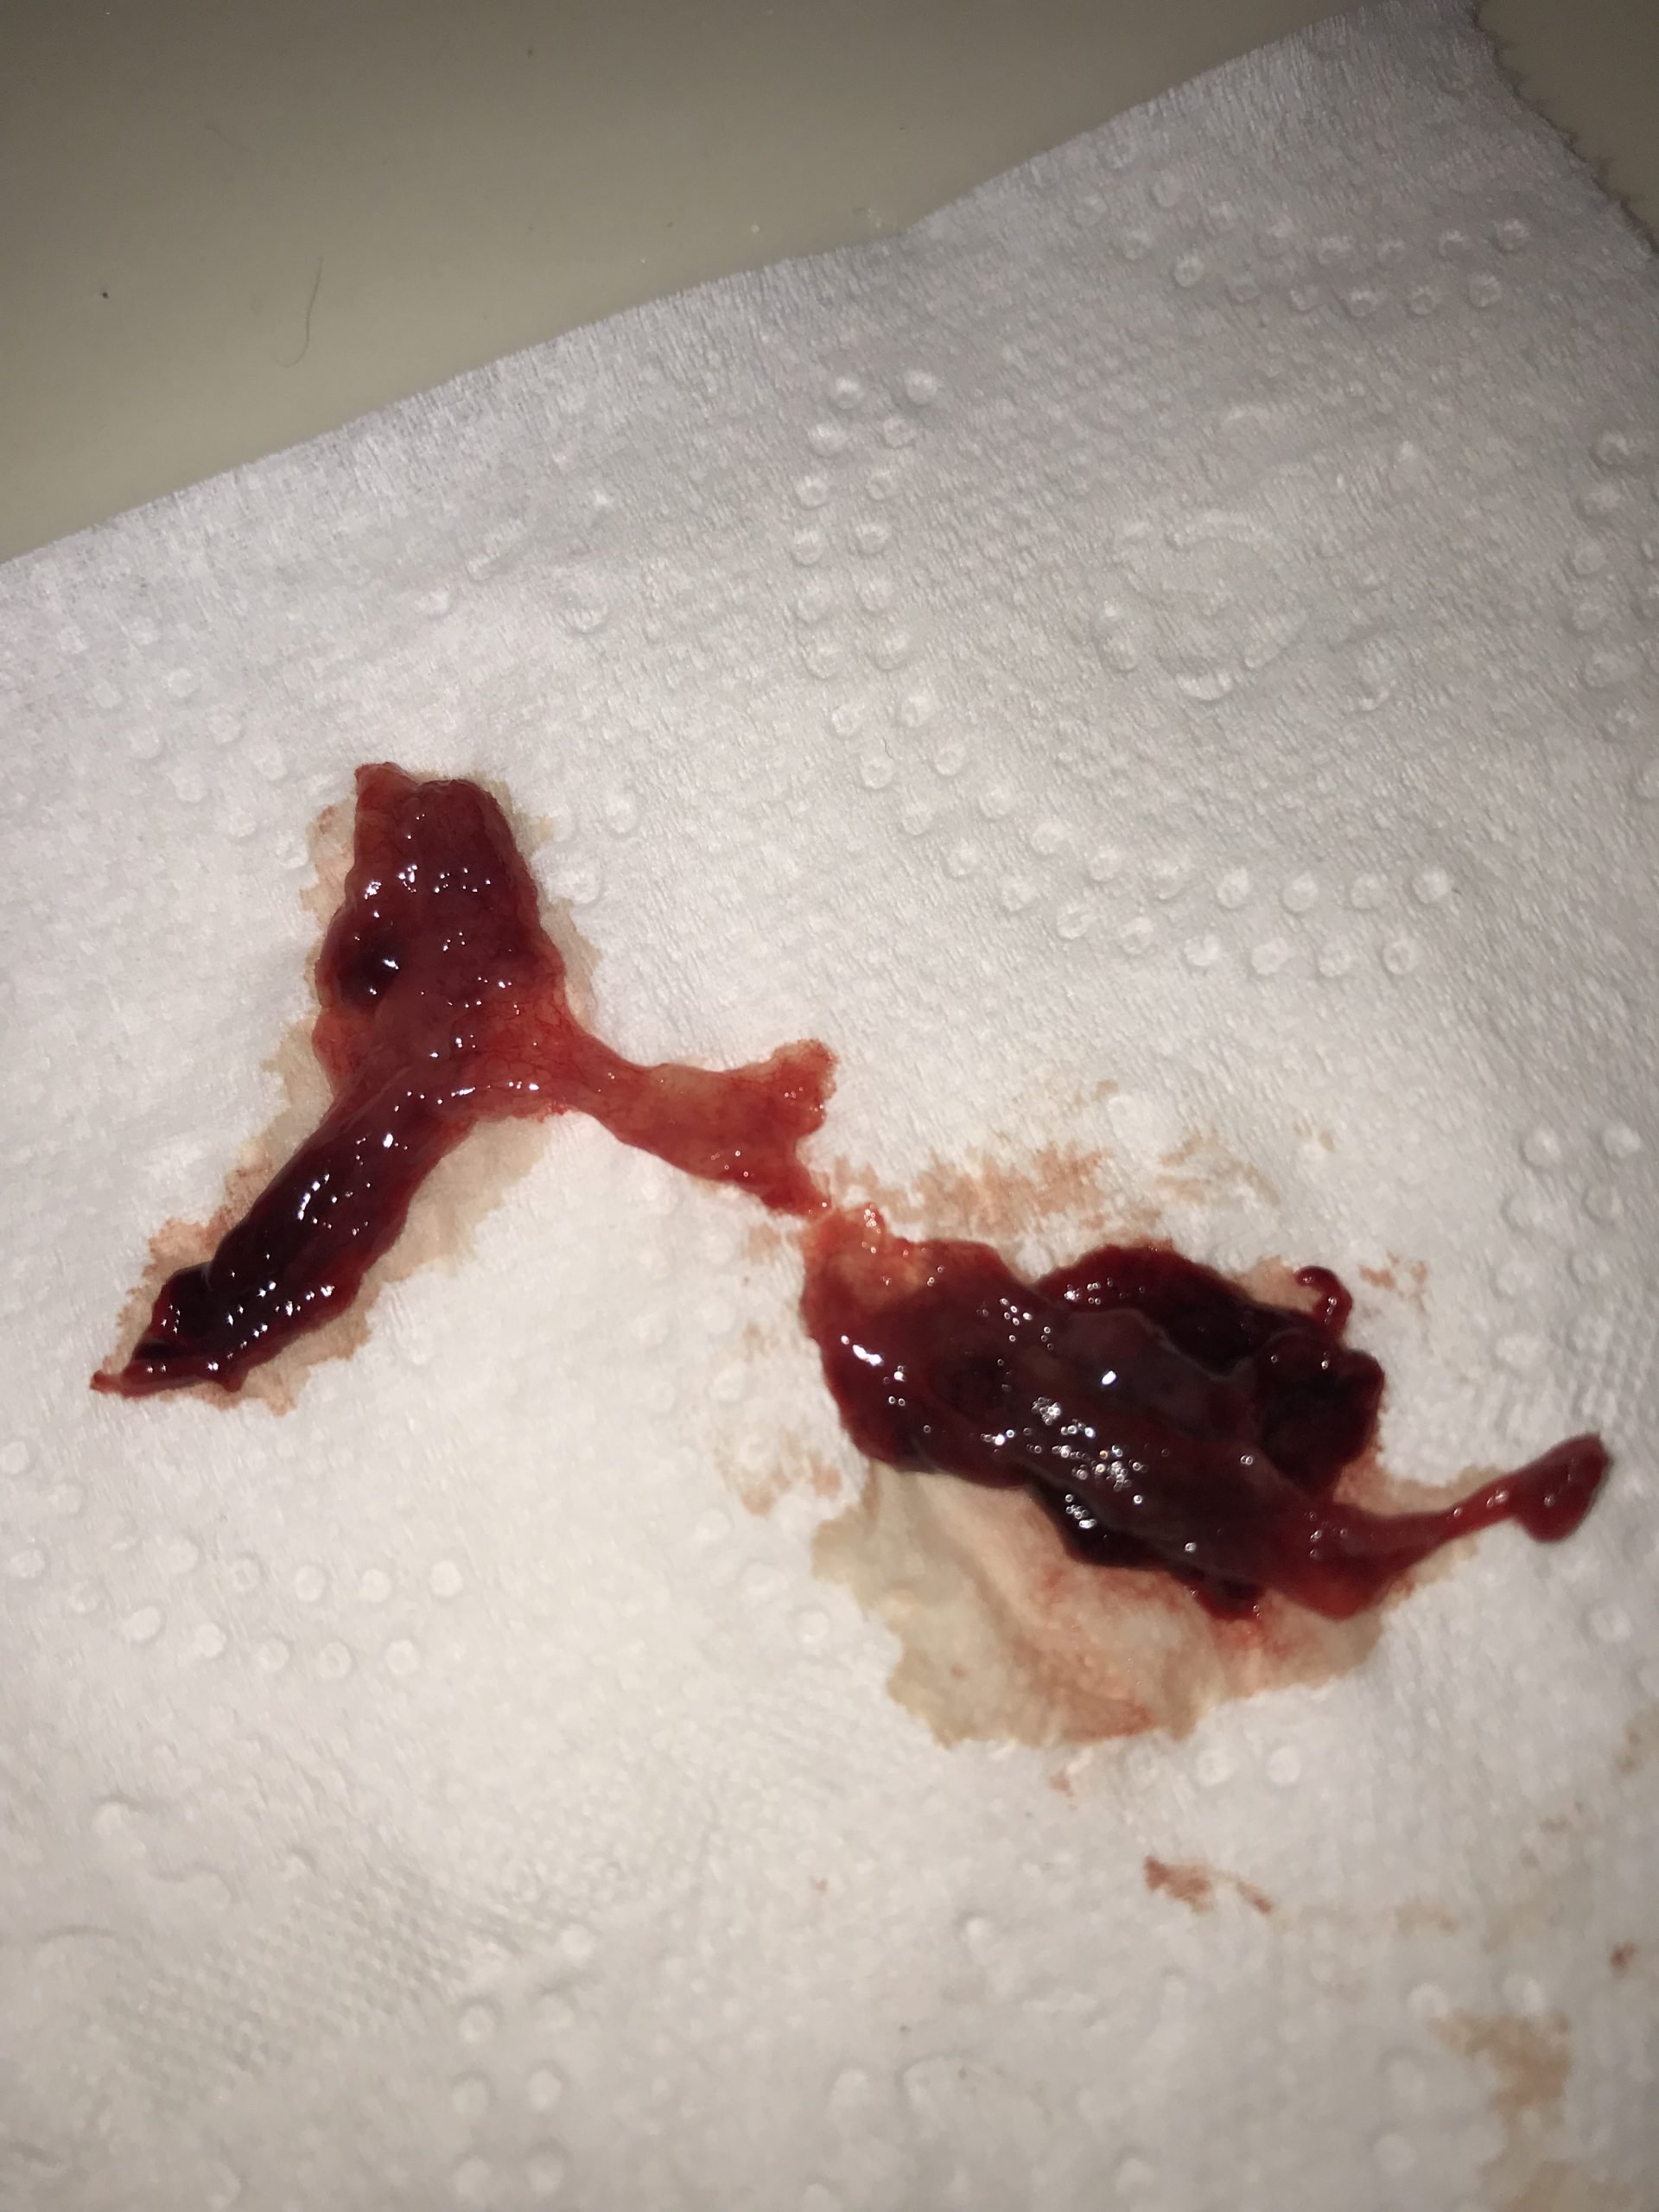 Miscarriage or regular blood clot? (Gross pic)